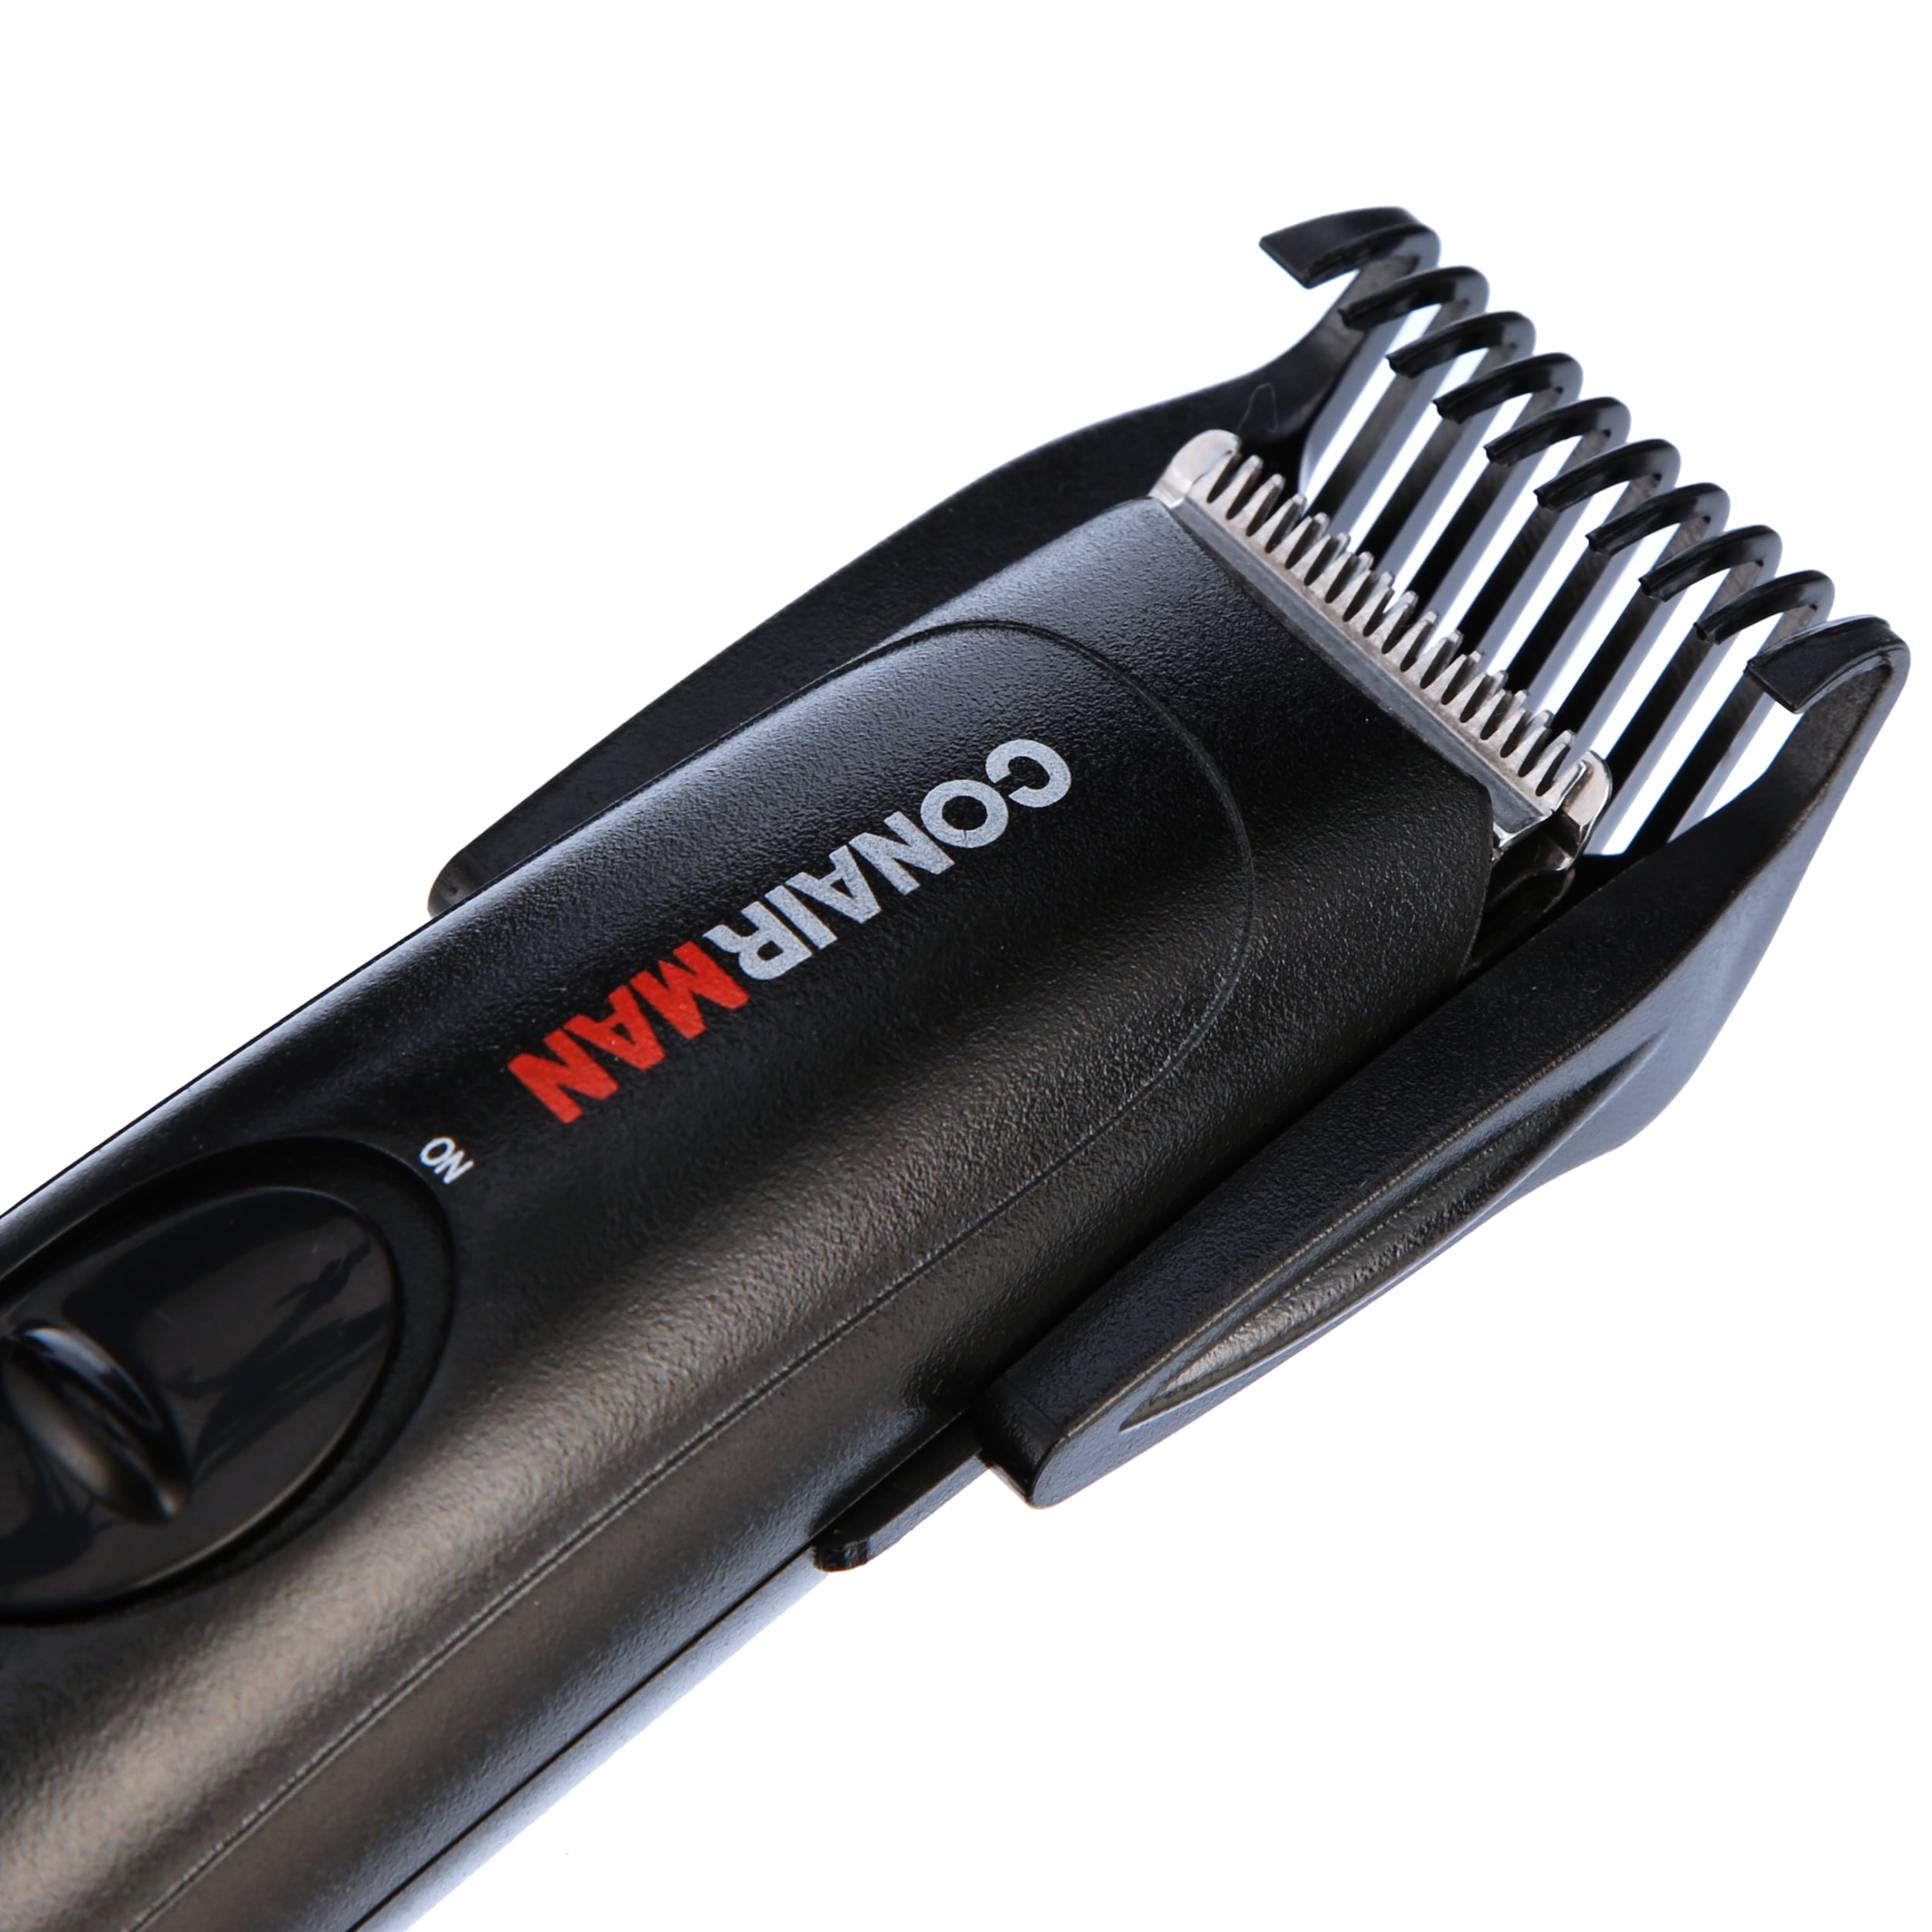 Conair Battery-Operated 2 in 1 Beard and Mustache Trimmer